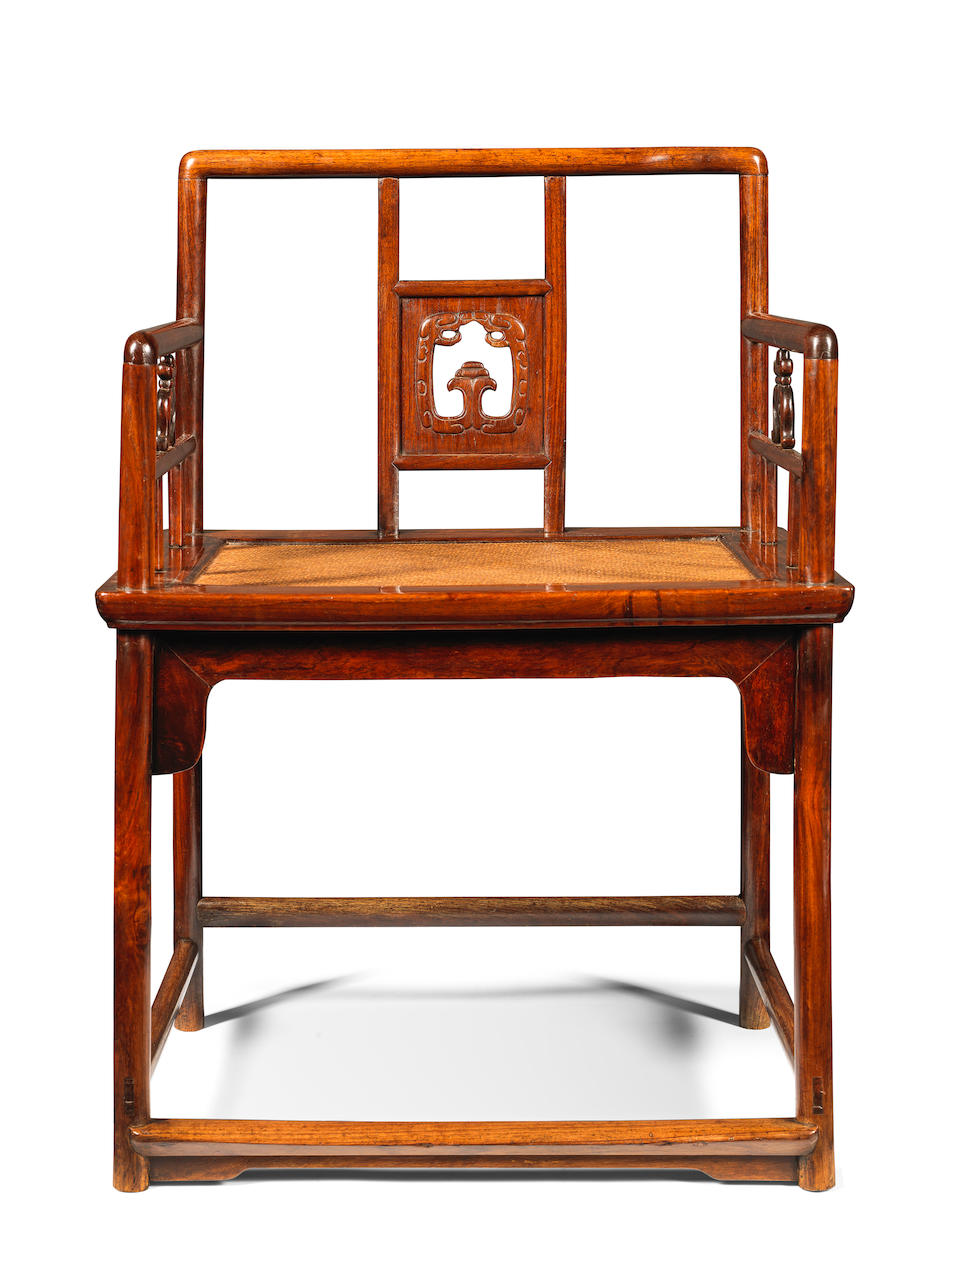 An exceptionally rare huanghuali low-back armchair, meiguiyi 17th century